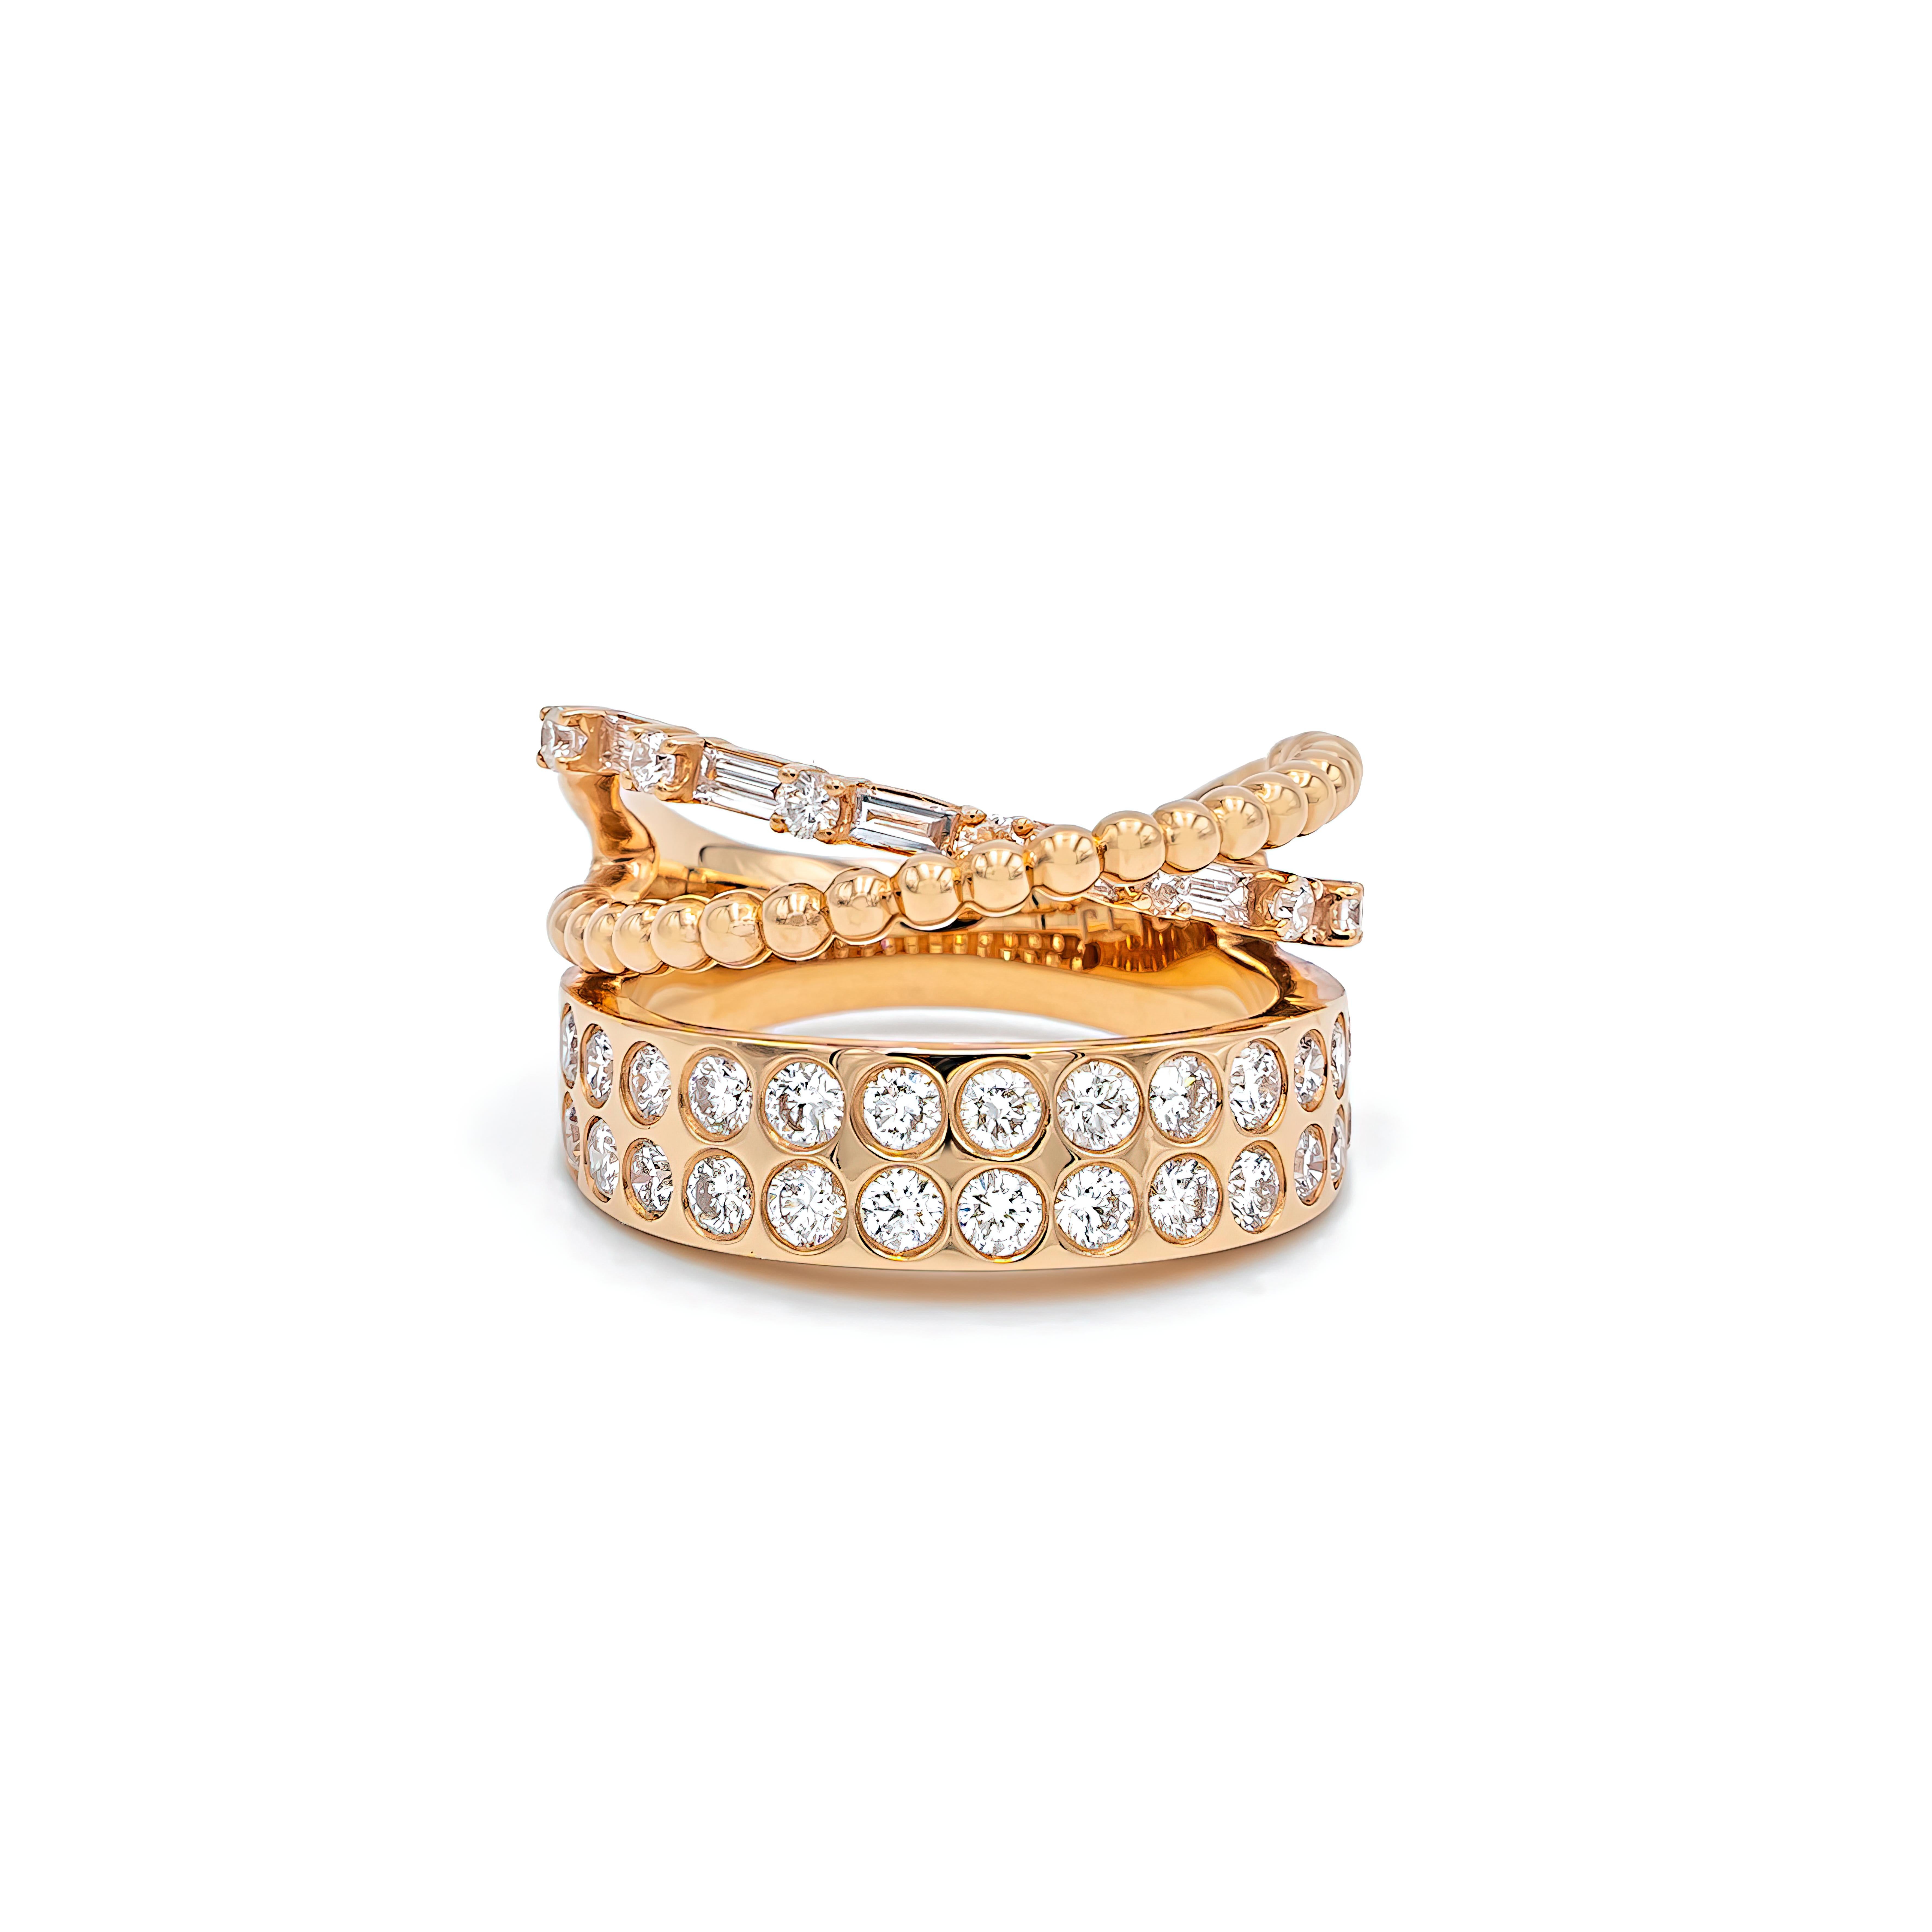 Artisan Mix and Matched Round and Tapered Diamonds in Criss Cross Bands, 18k Gold Ring For Sale